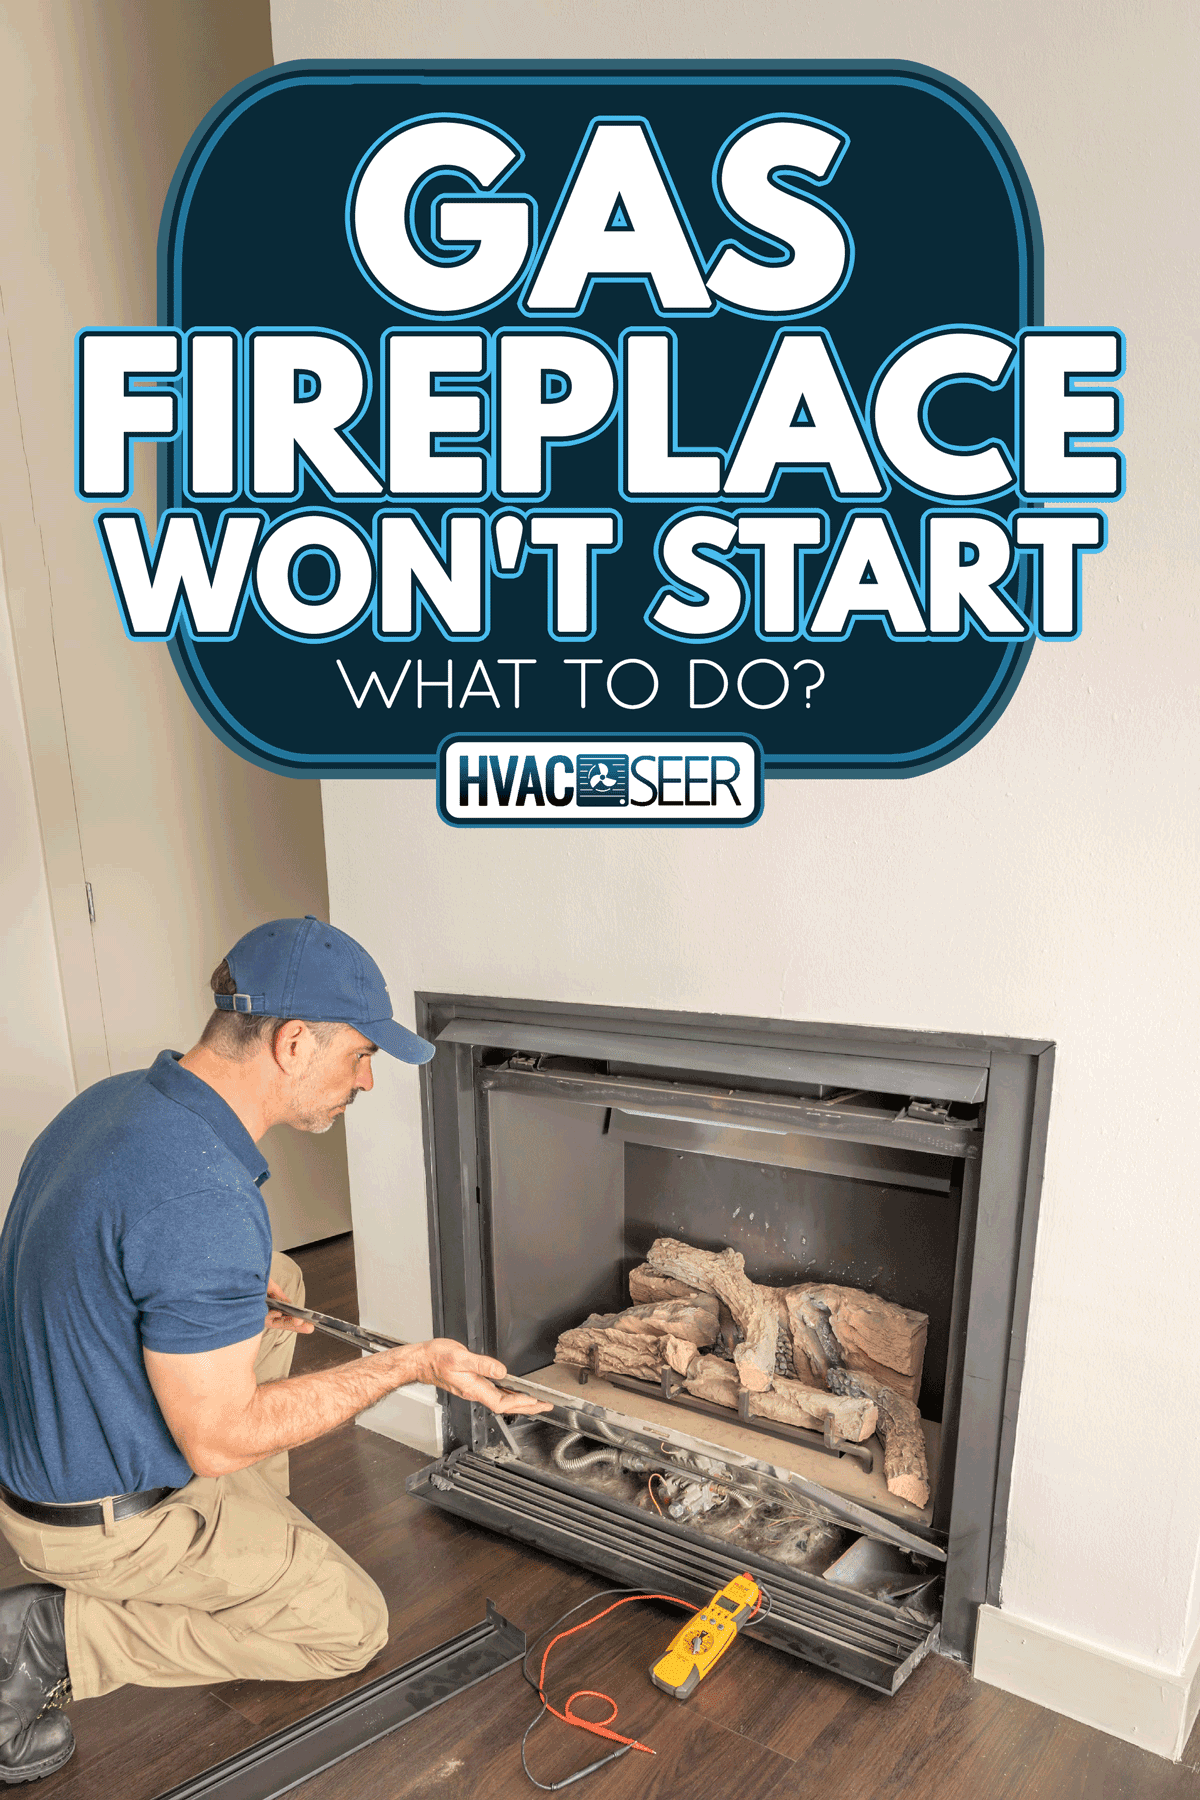 A service technician repairing a gas fireplace in a home, Gas Fireplace Won't Start - What To Do?